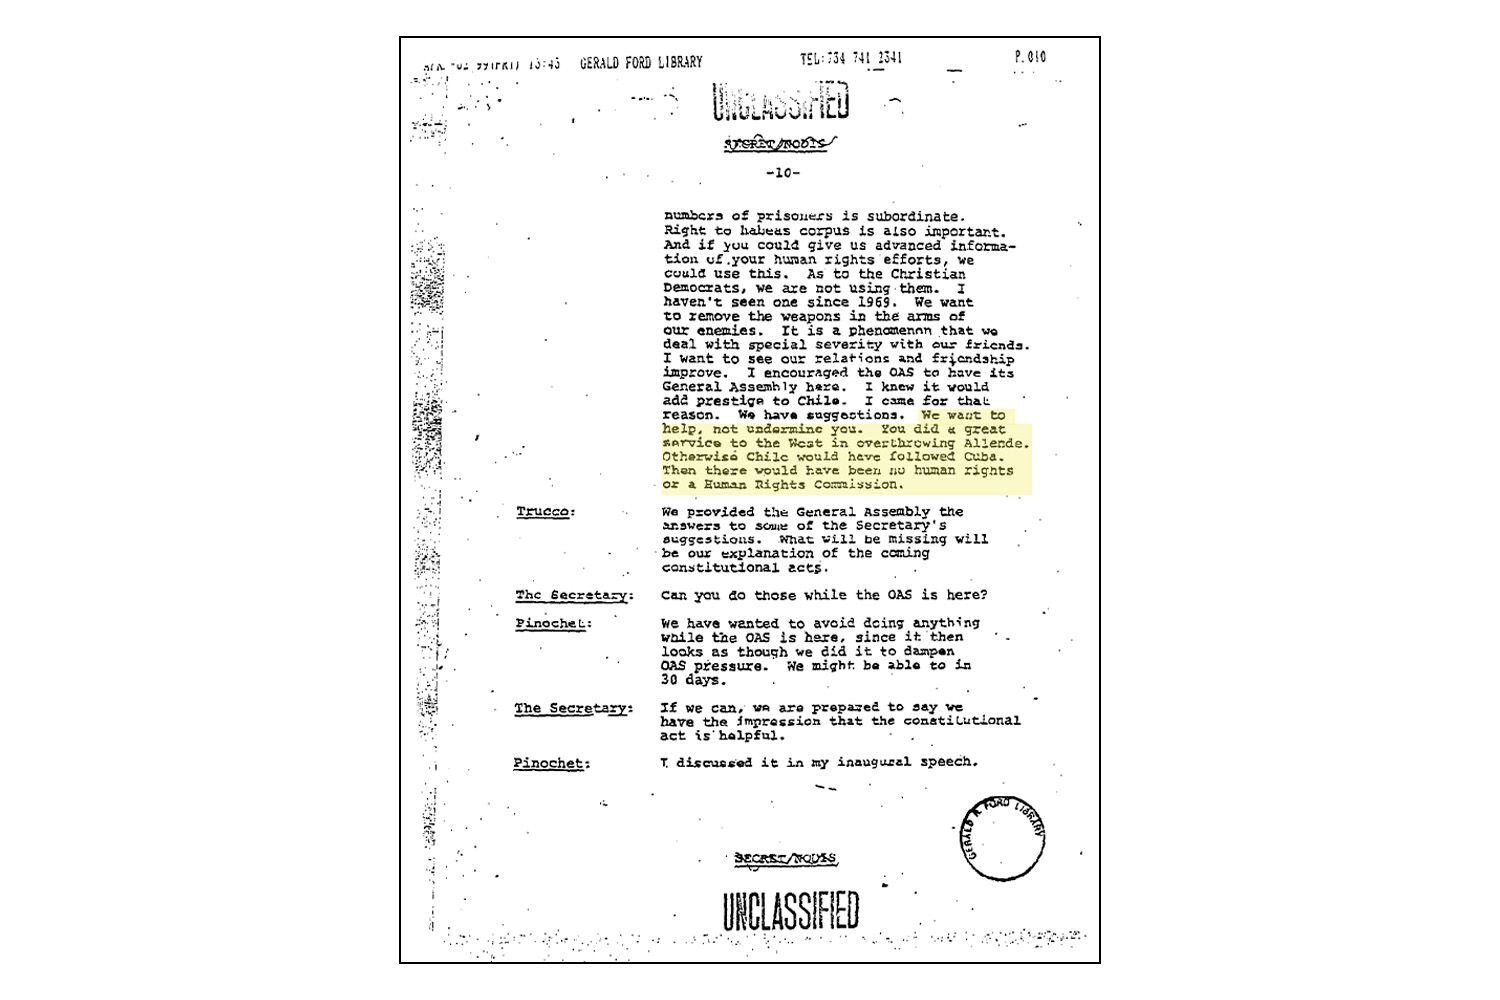 A page of the transcript of the private meeting between Kissinger and Pinochet.